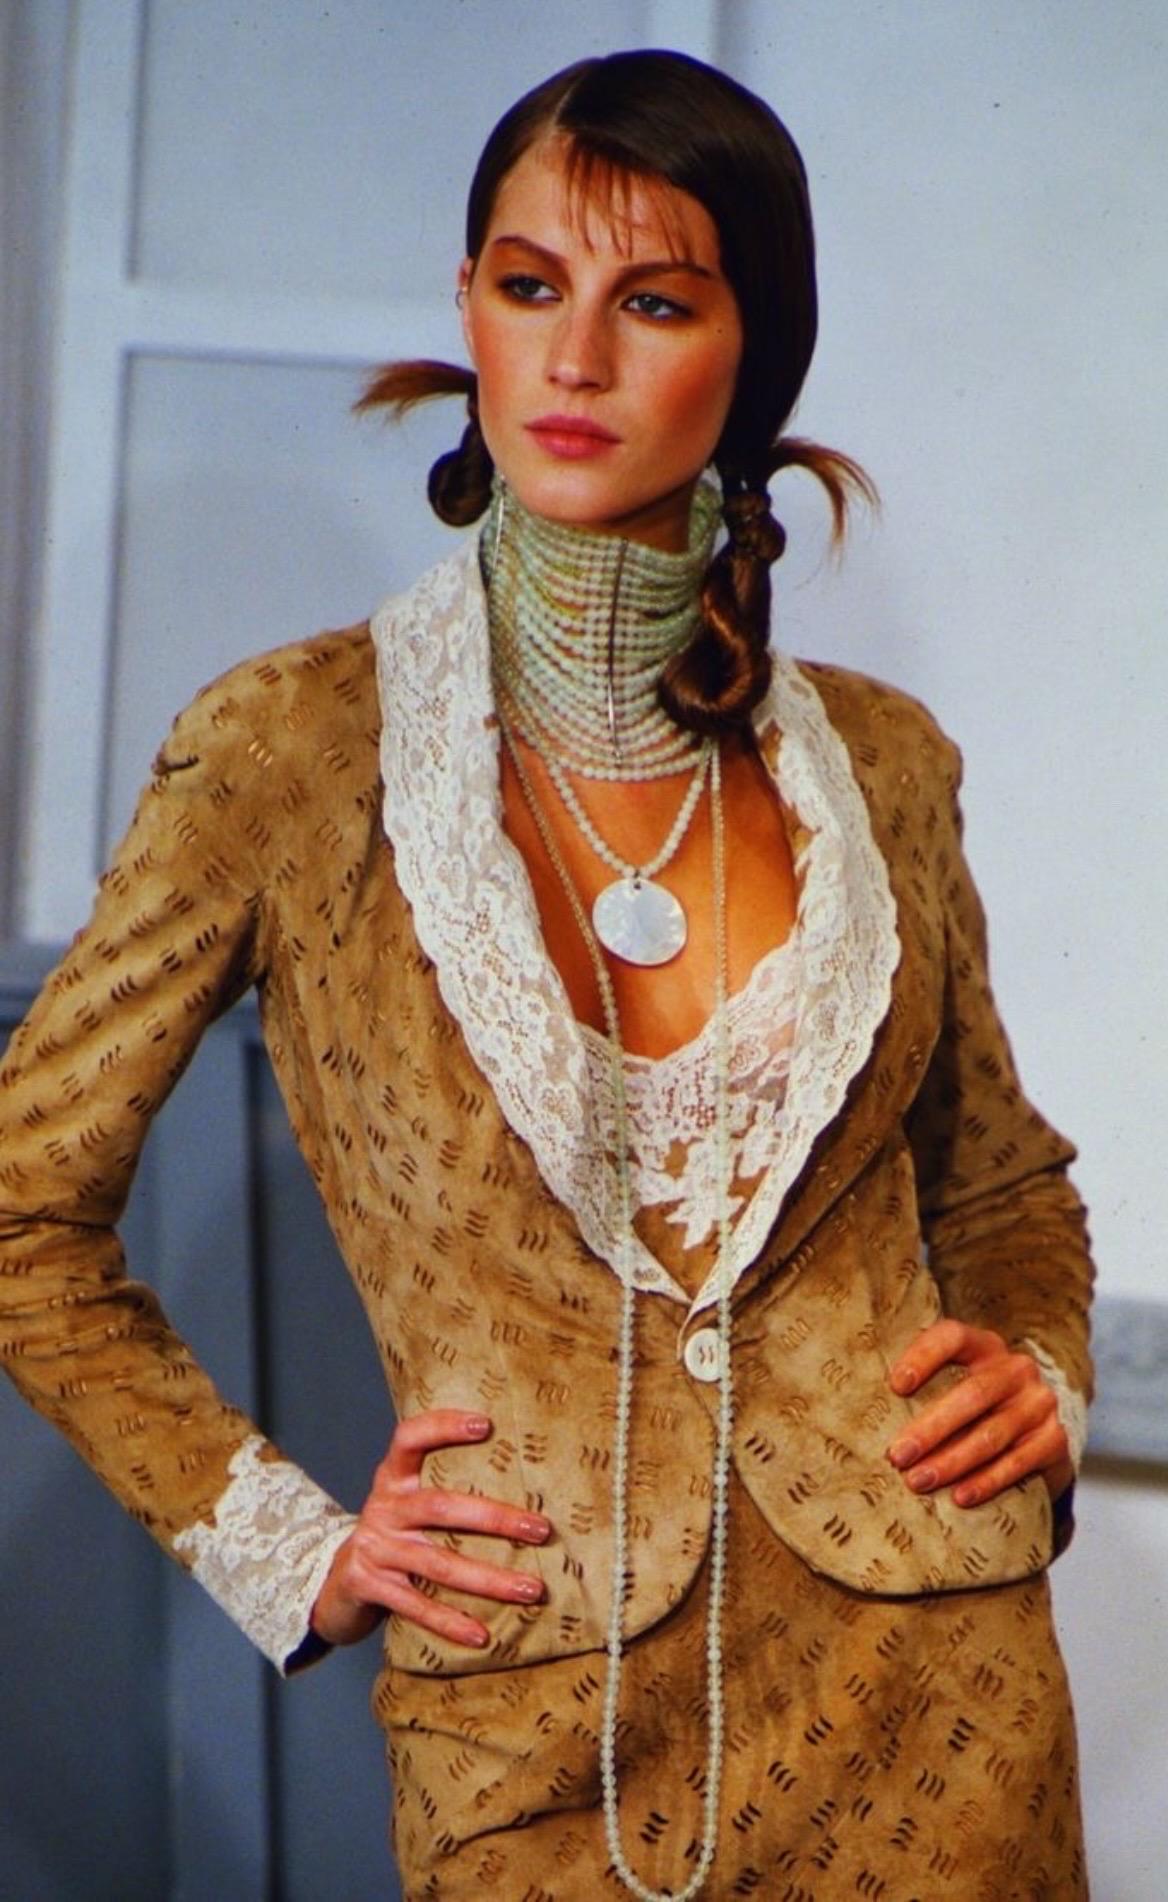 From celebrity-endorsed Queen Vin Archive (QV Archive):

A star of QV Archive, the tenderest and most spectacular choker multi strand Maasai necklace, as seen modeled by Gisele on the runway of one of the most discreet Dior shows ever, Fall 1999 RTW